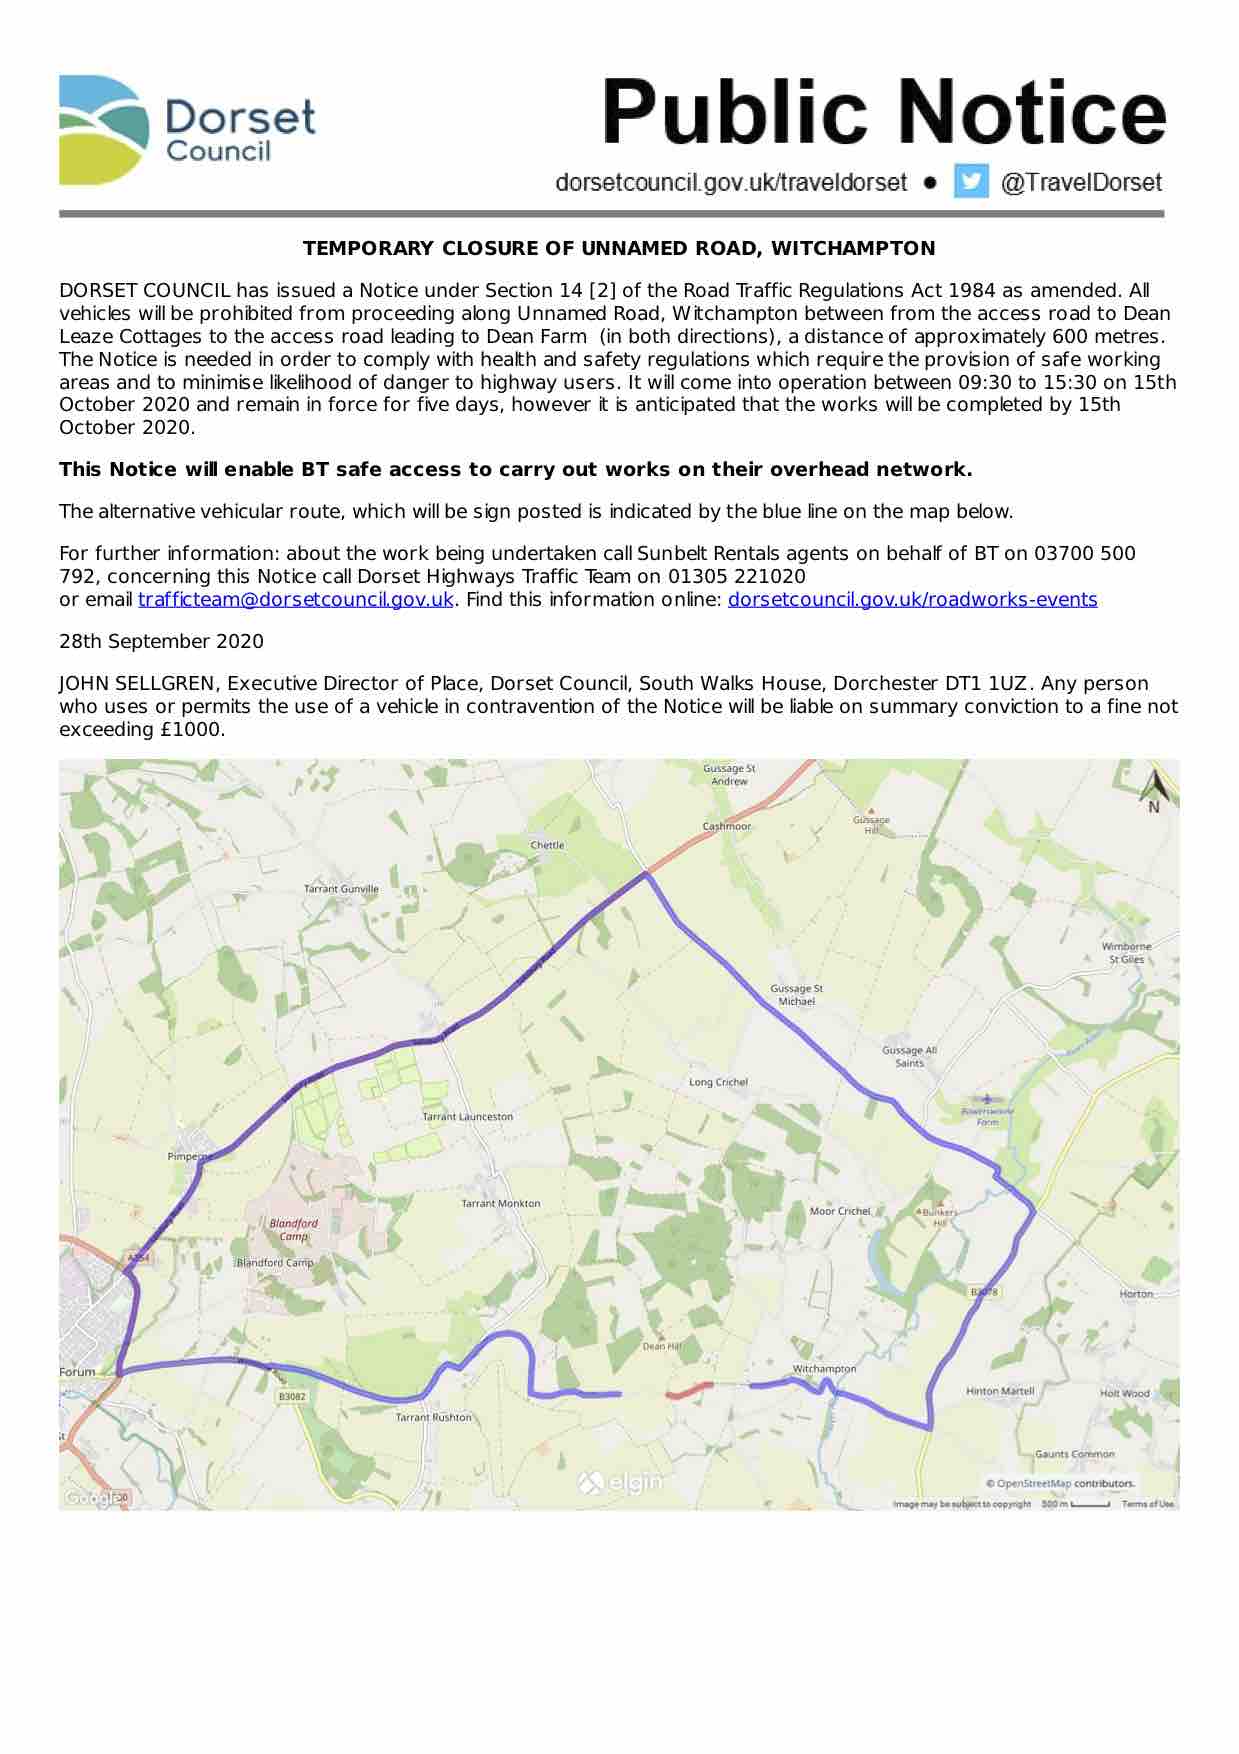 Image of the notice including a map show diversions